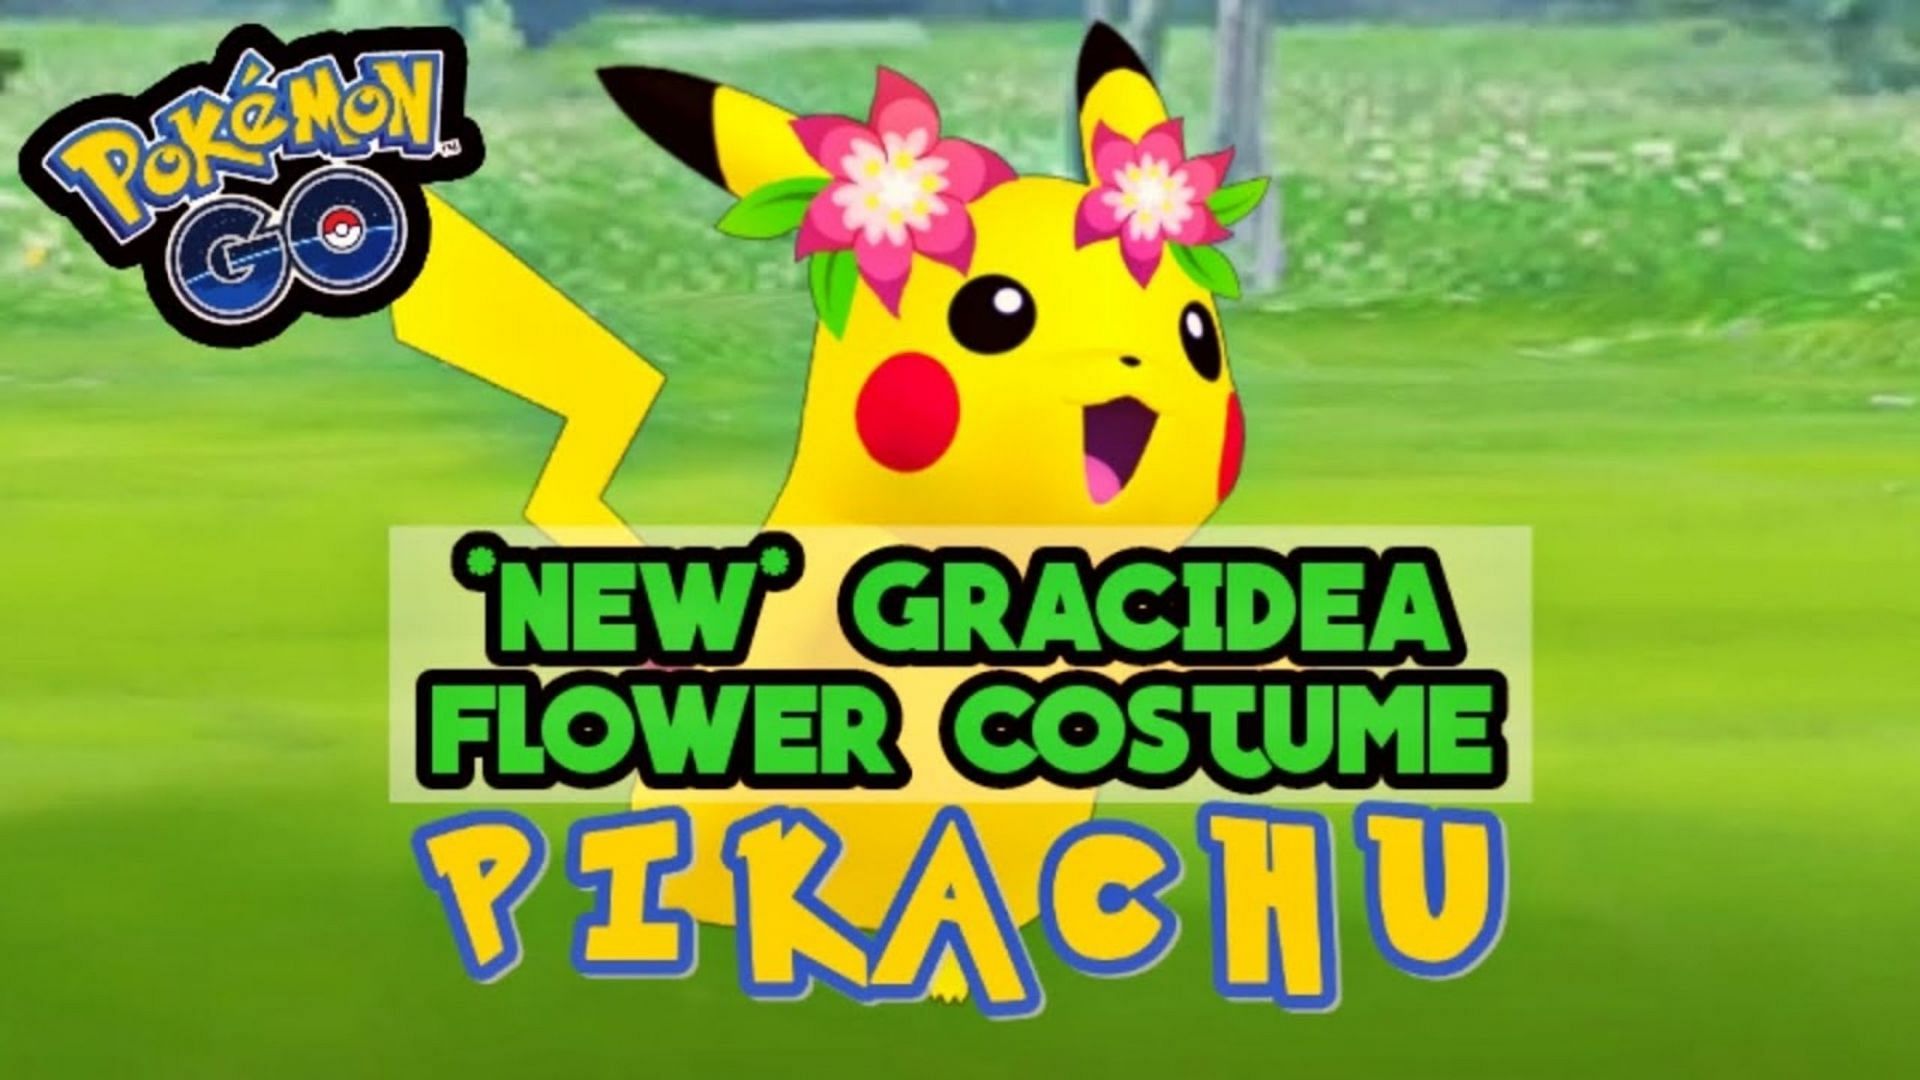 Can You Catch A Gracidea Flower Costumed Pikachu In Pokemon Go